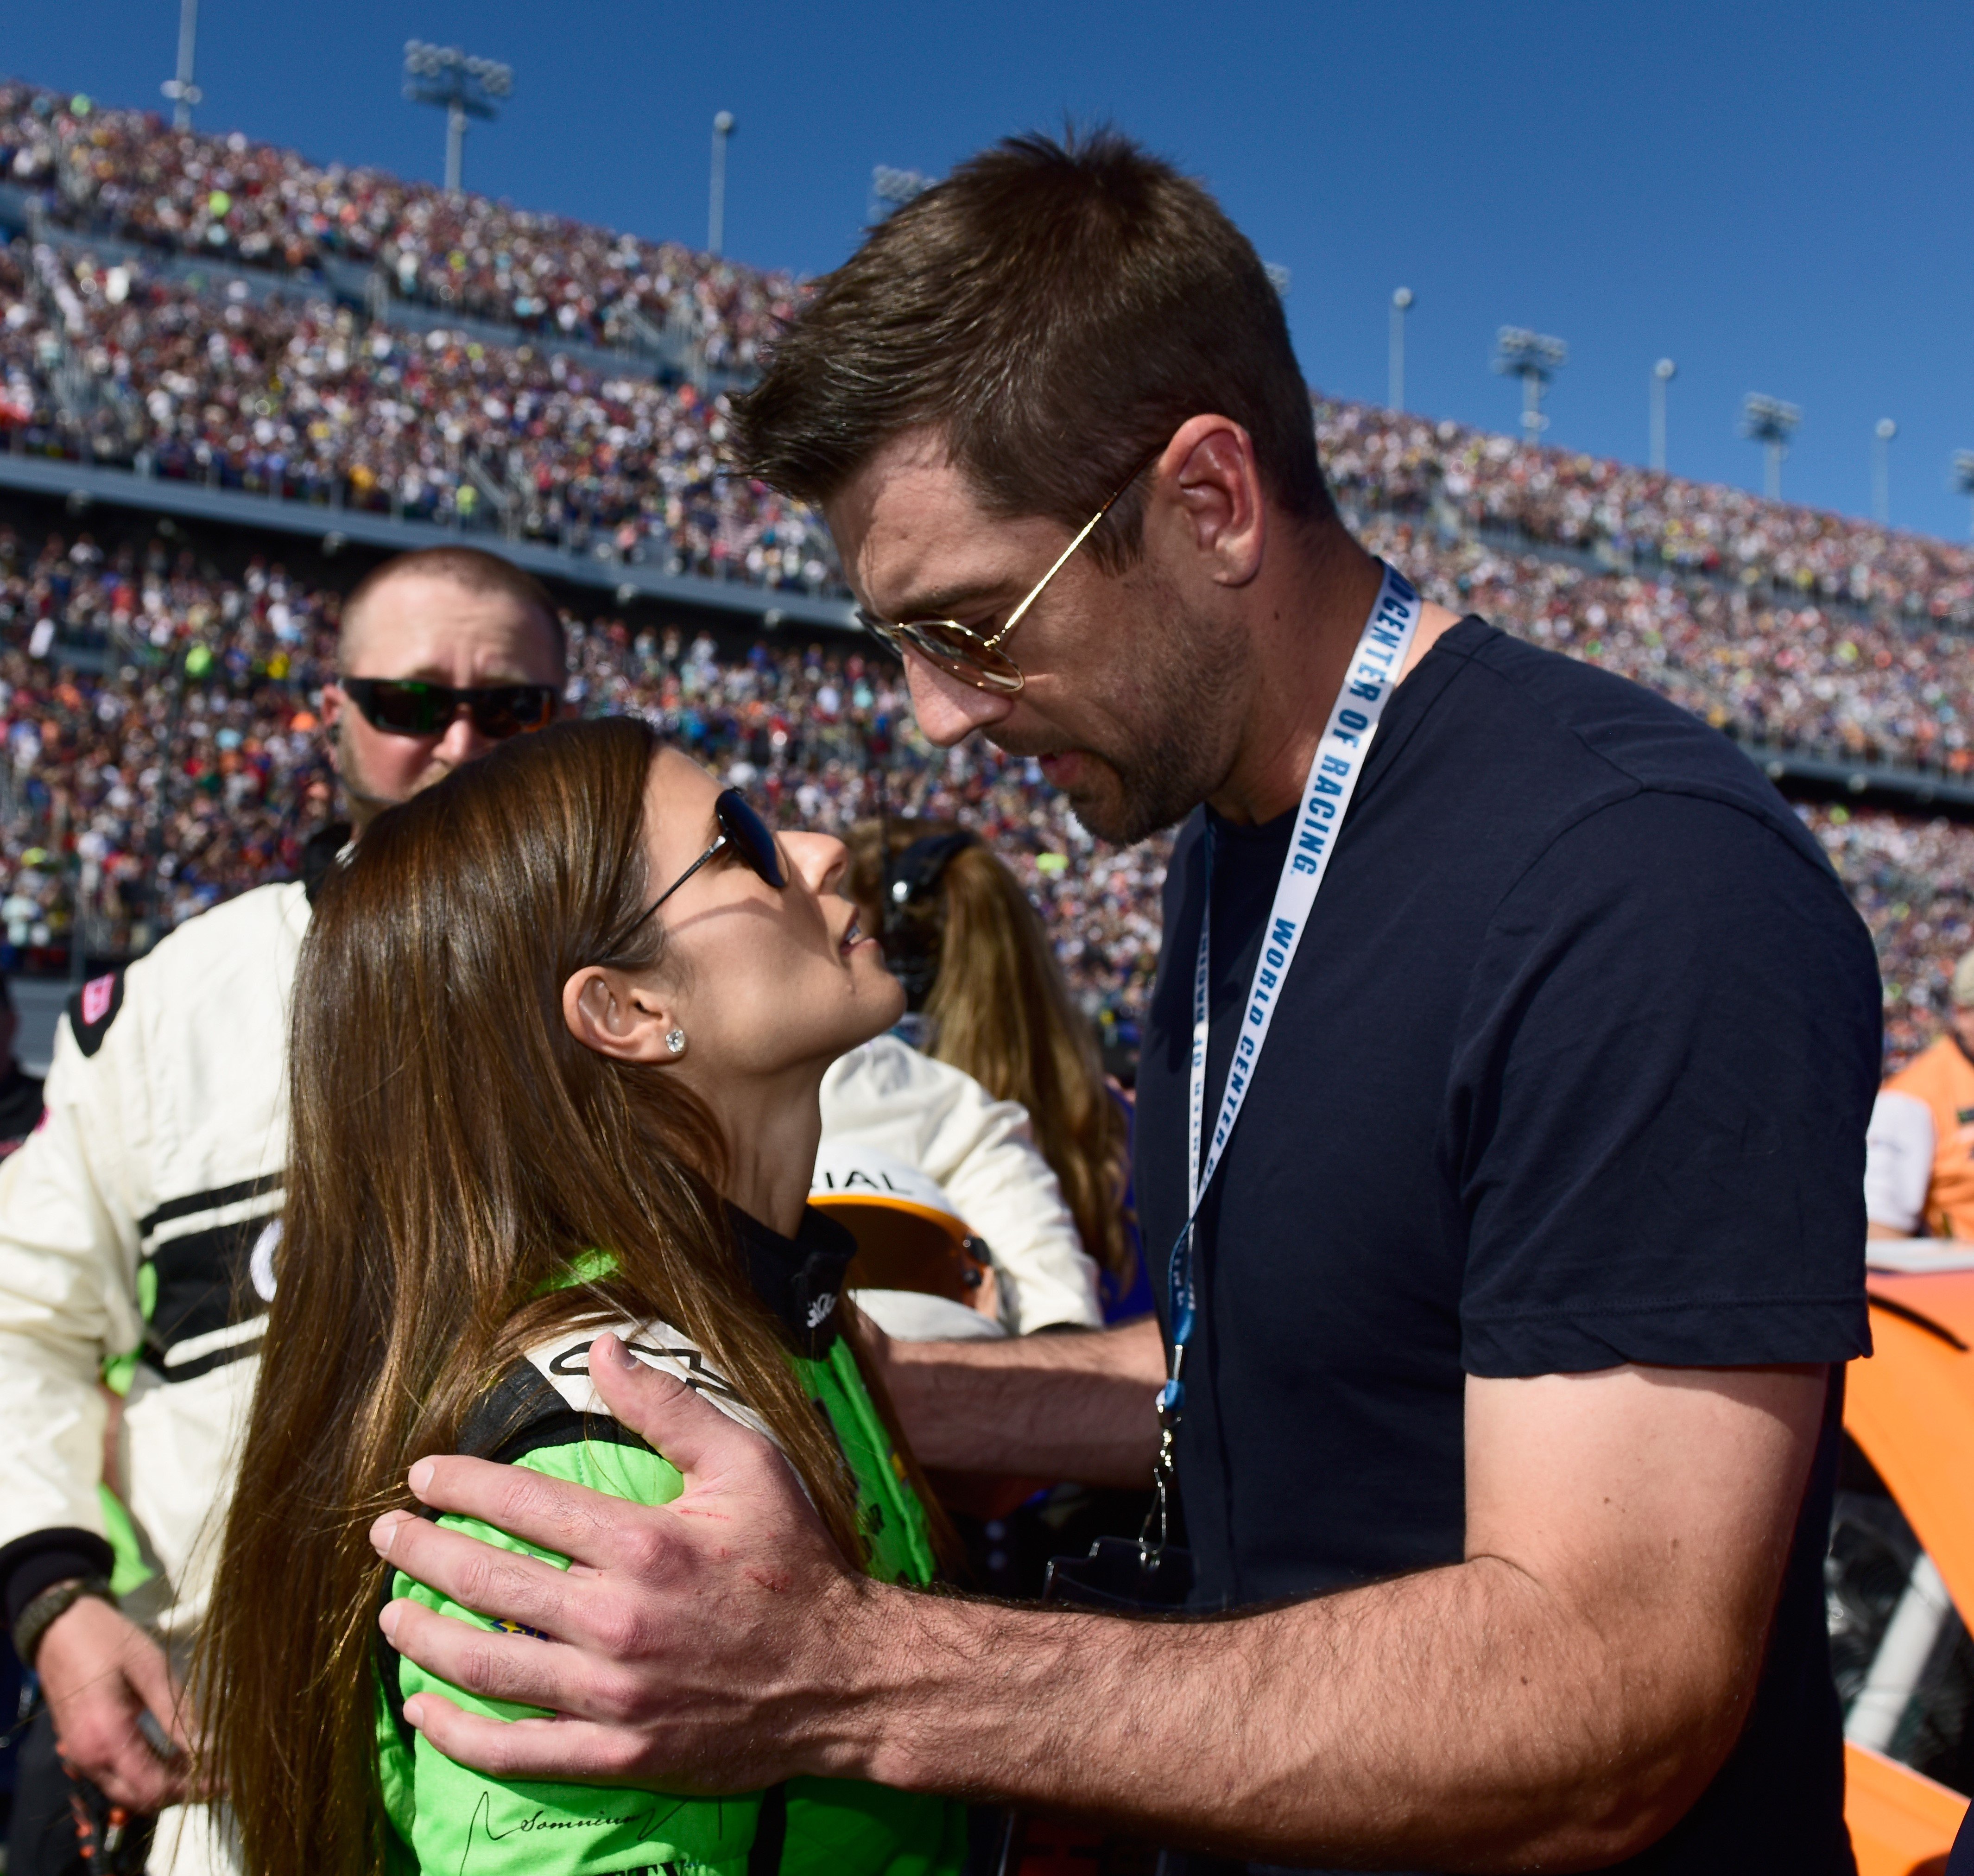 Danica Patrick with Aaron Rodgers at Monster Energy NASCAR Cup Series